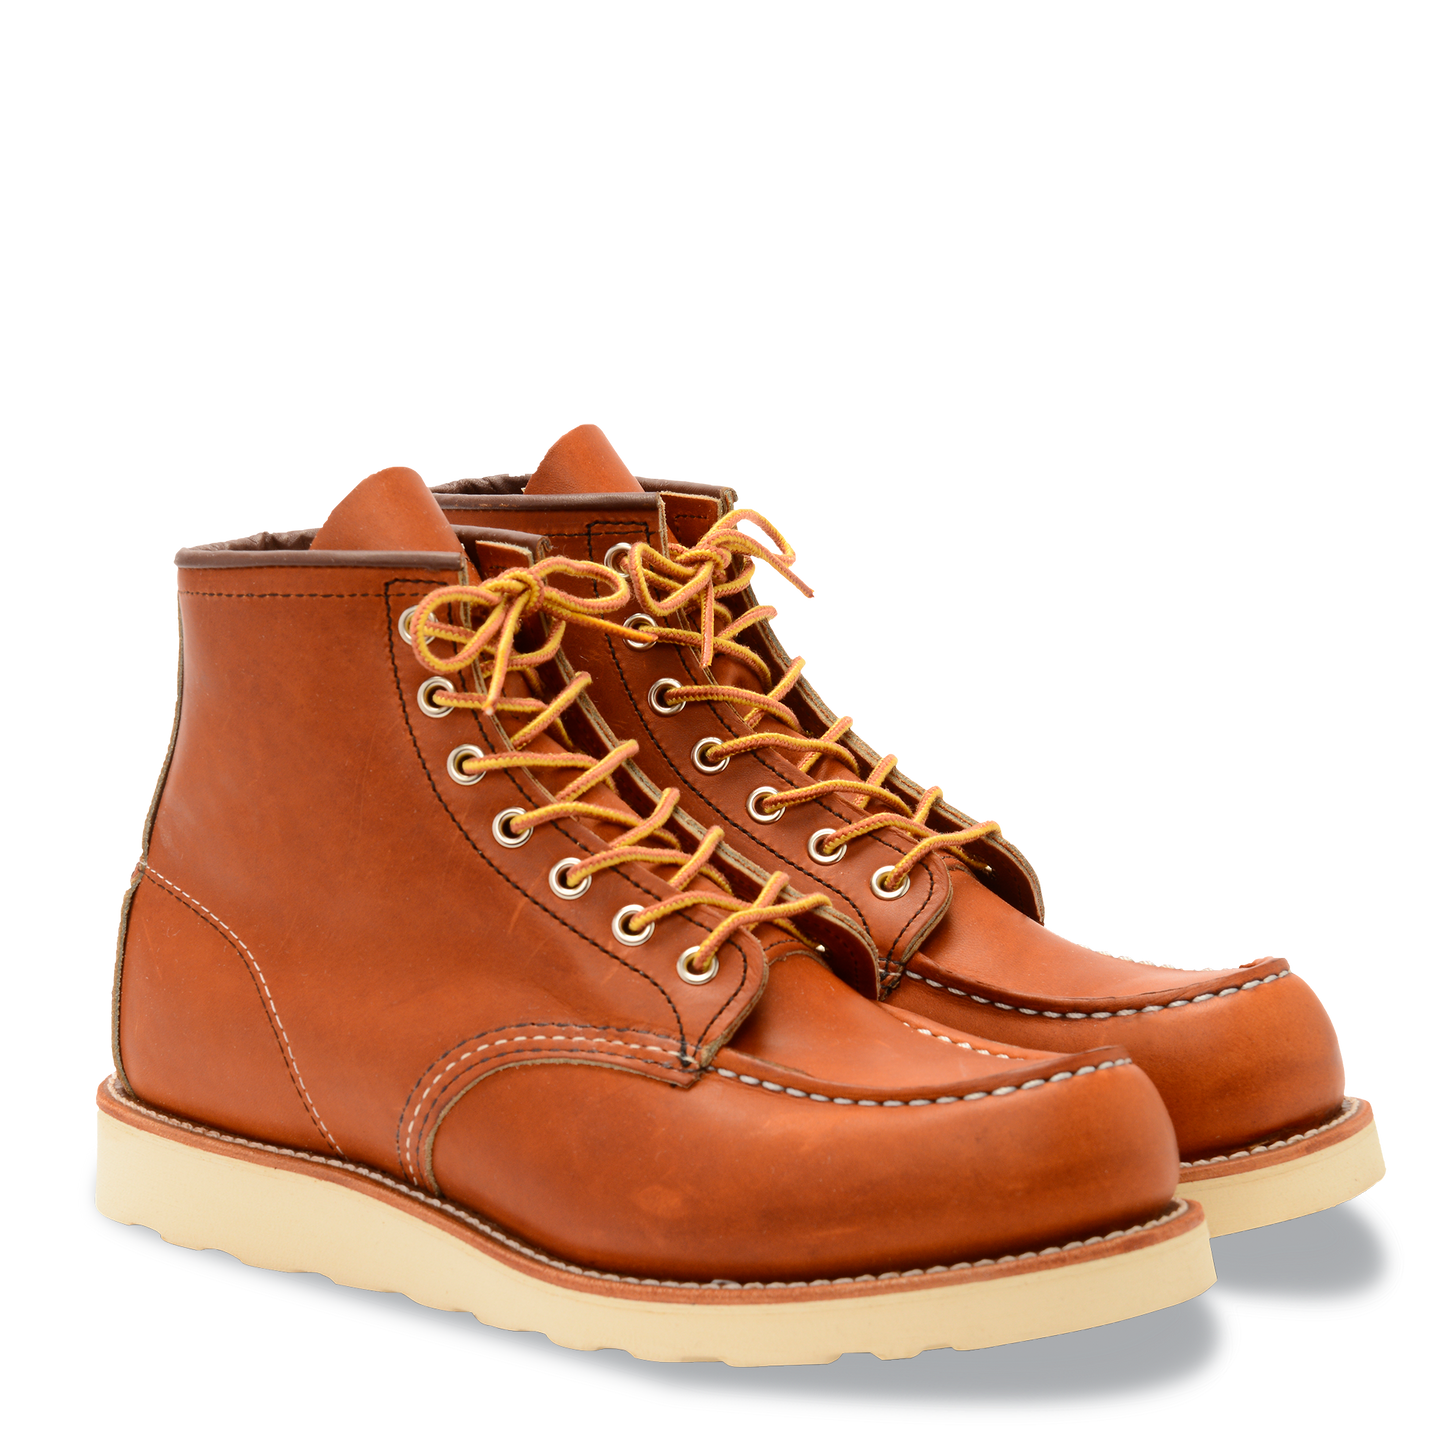 Red Wing 875 6" Moc Toe Boot